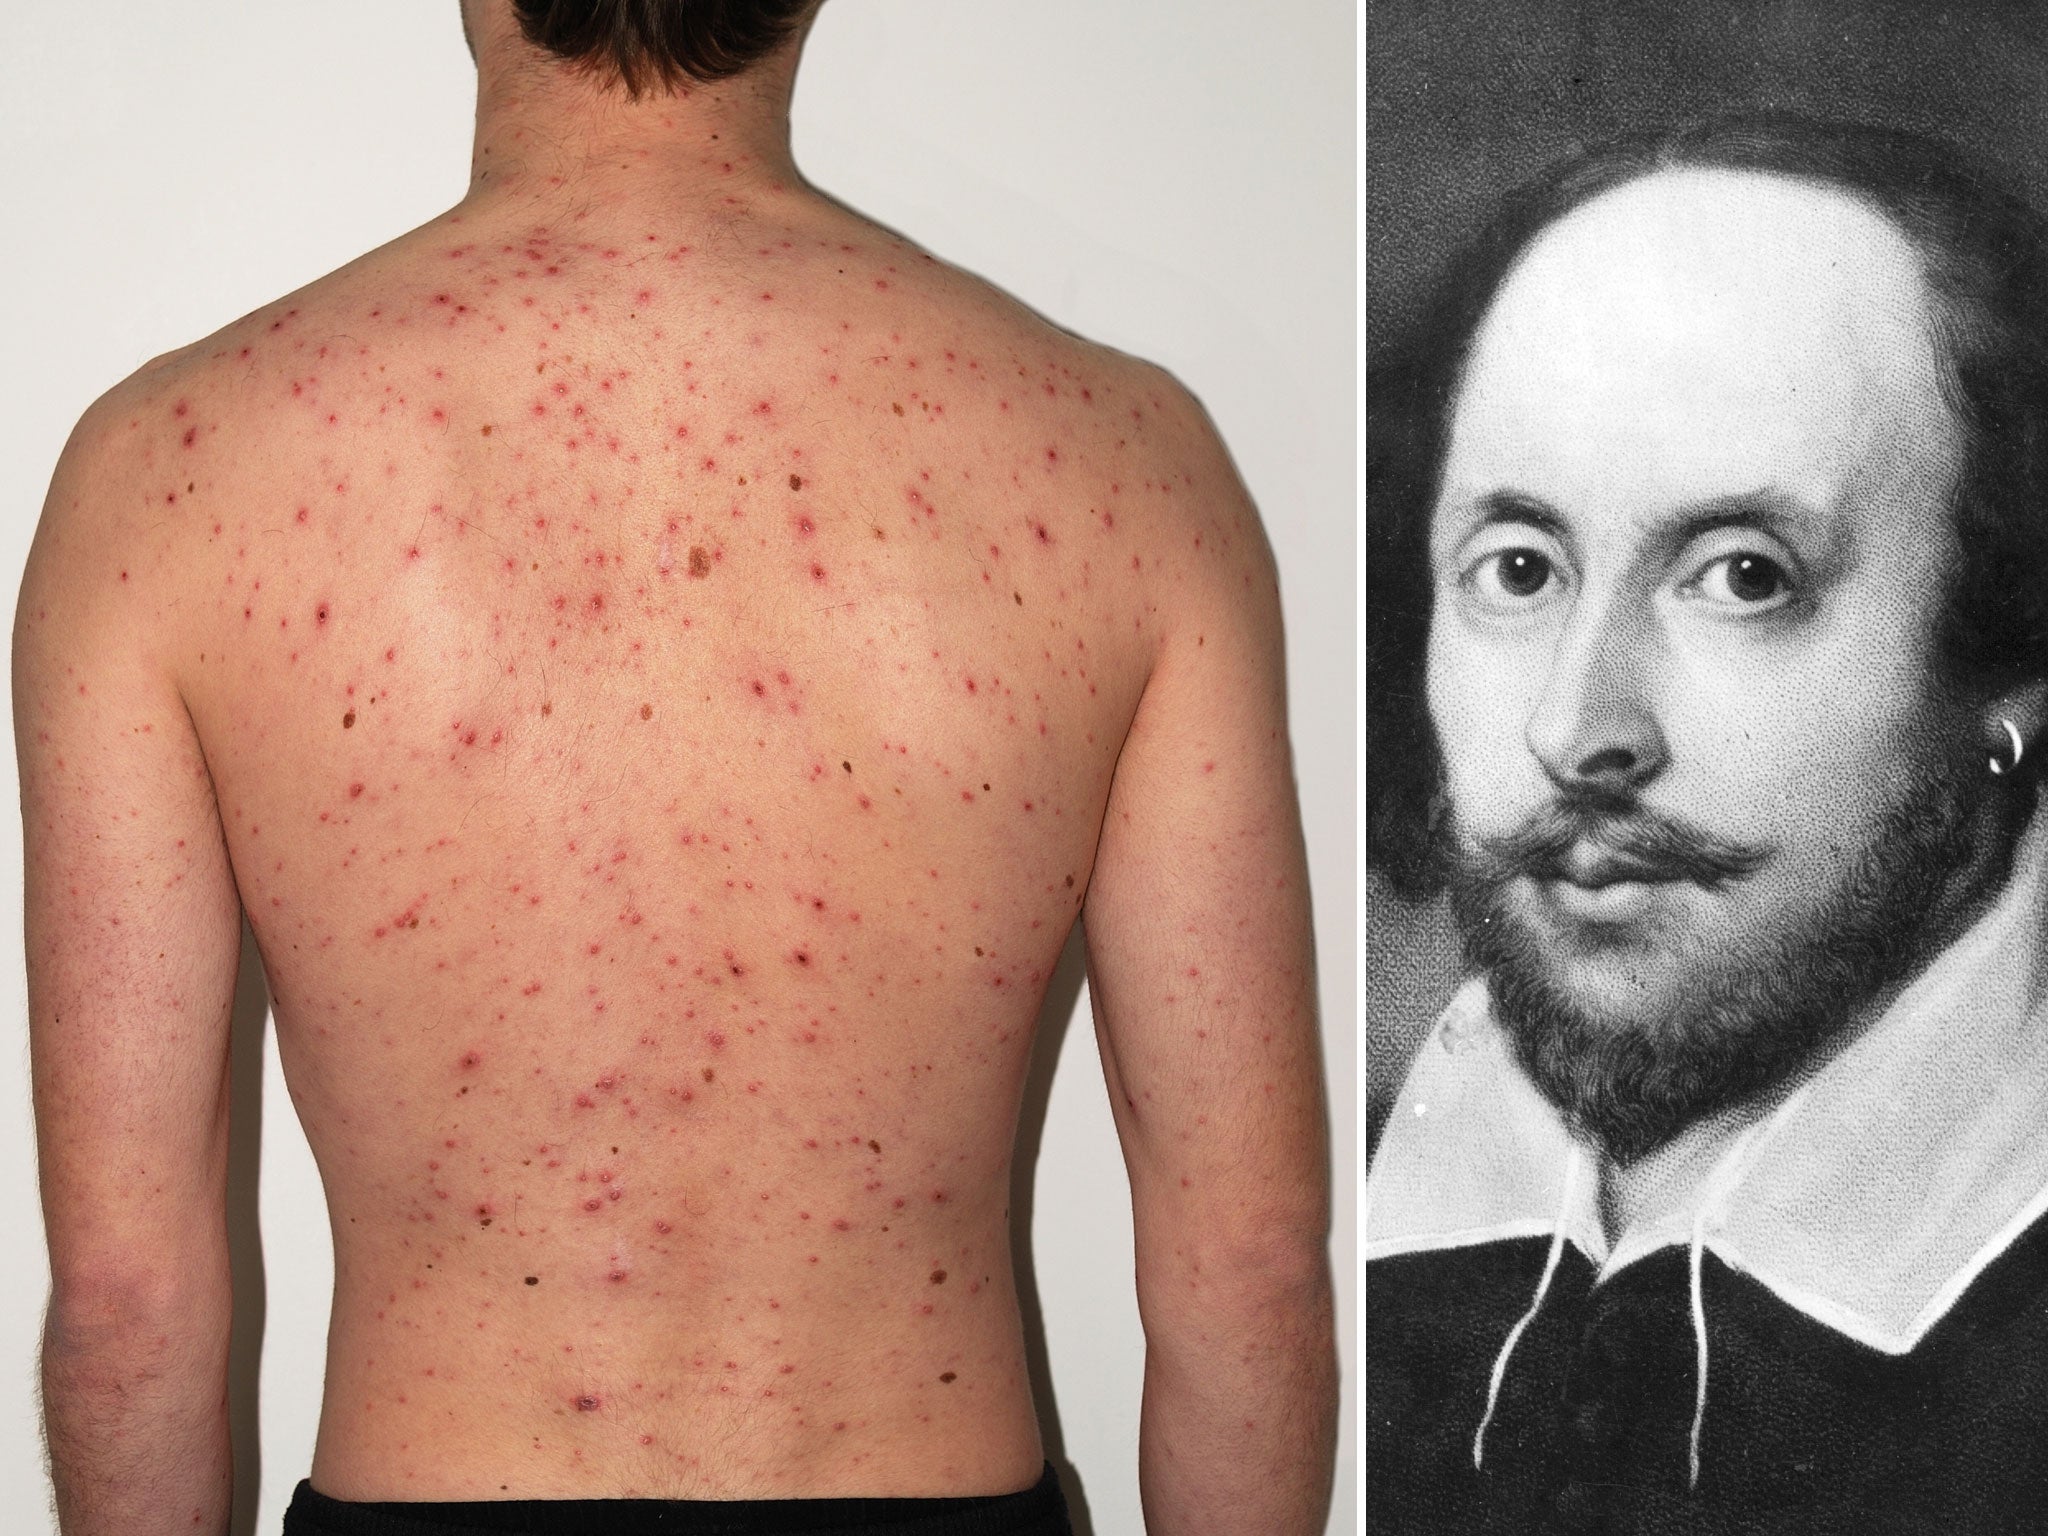 Medical experts are claiming that Shakespeare’s success has resulted in a painful legacy for people will skin disease